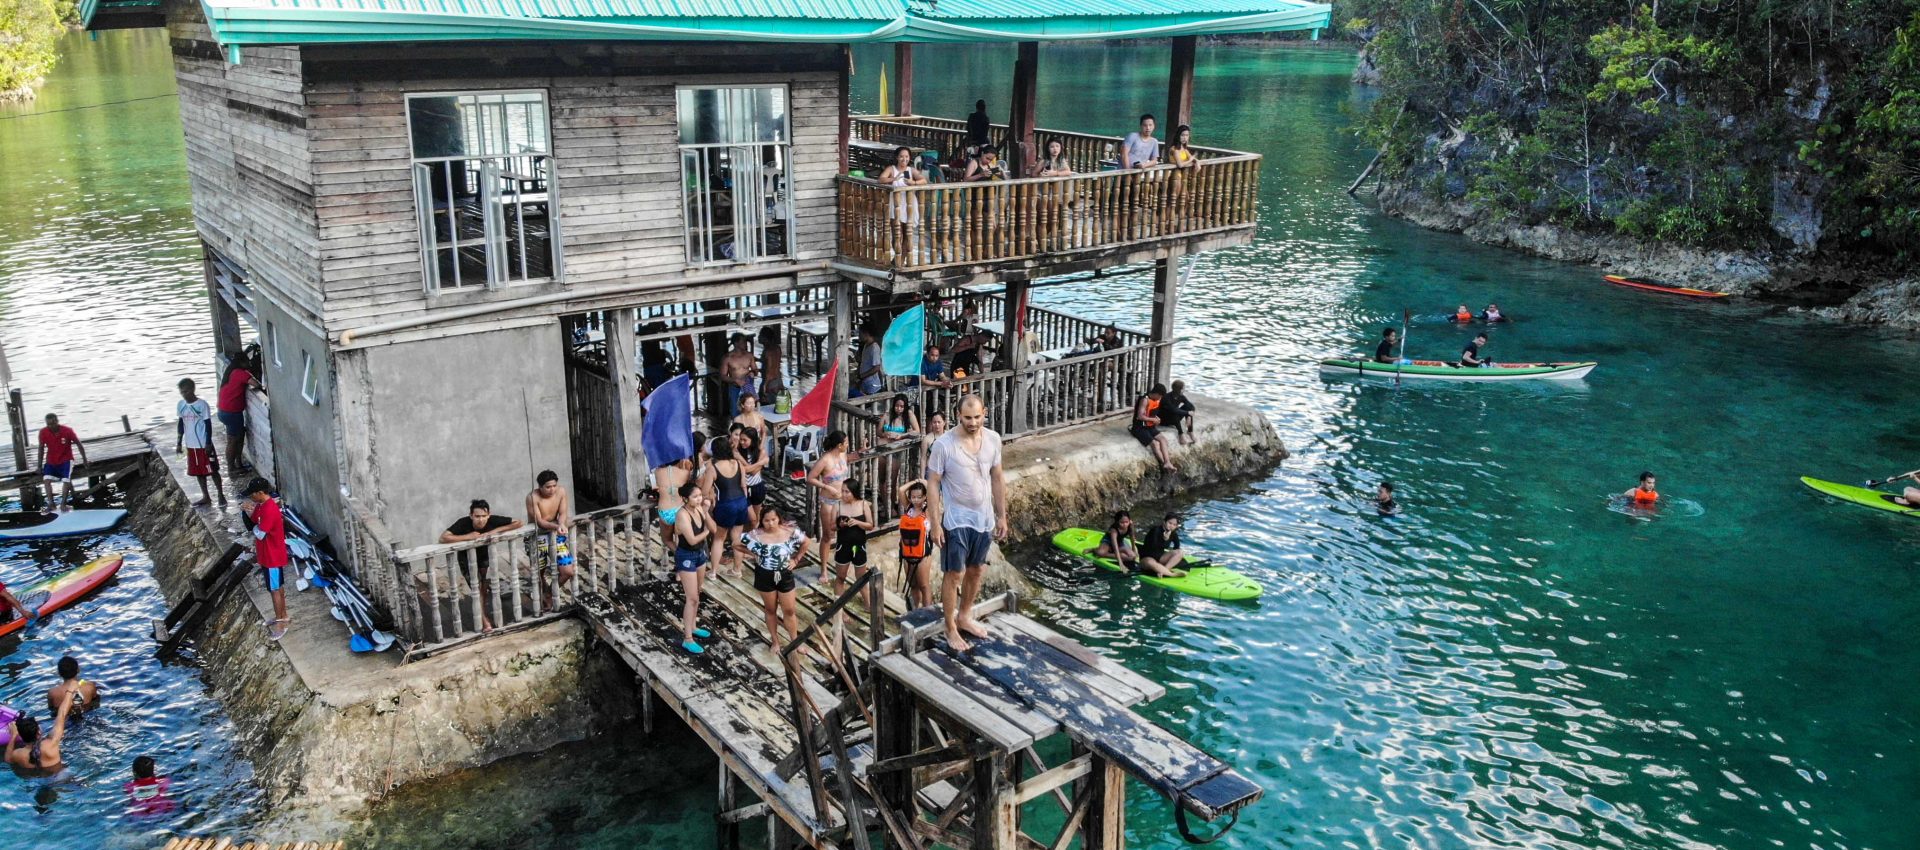 Playgrounds for adults, where you can dive, sup, kayak or just have a drink and chill.